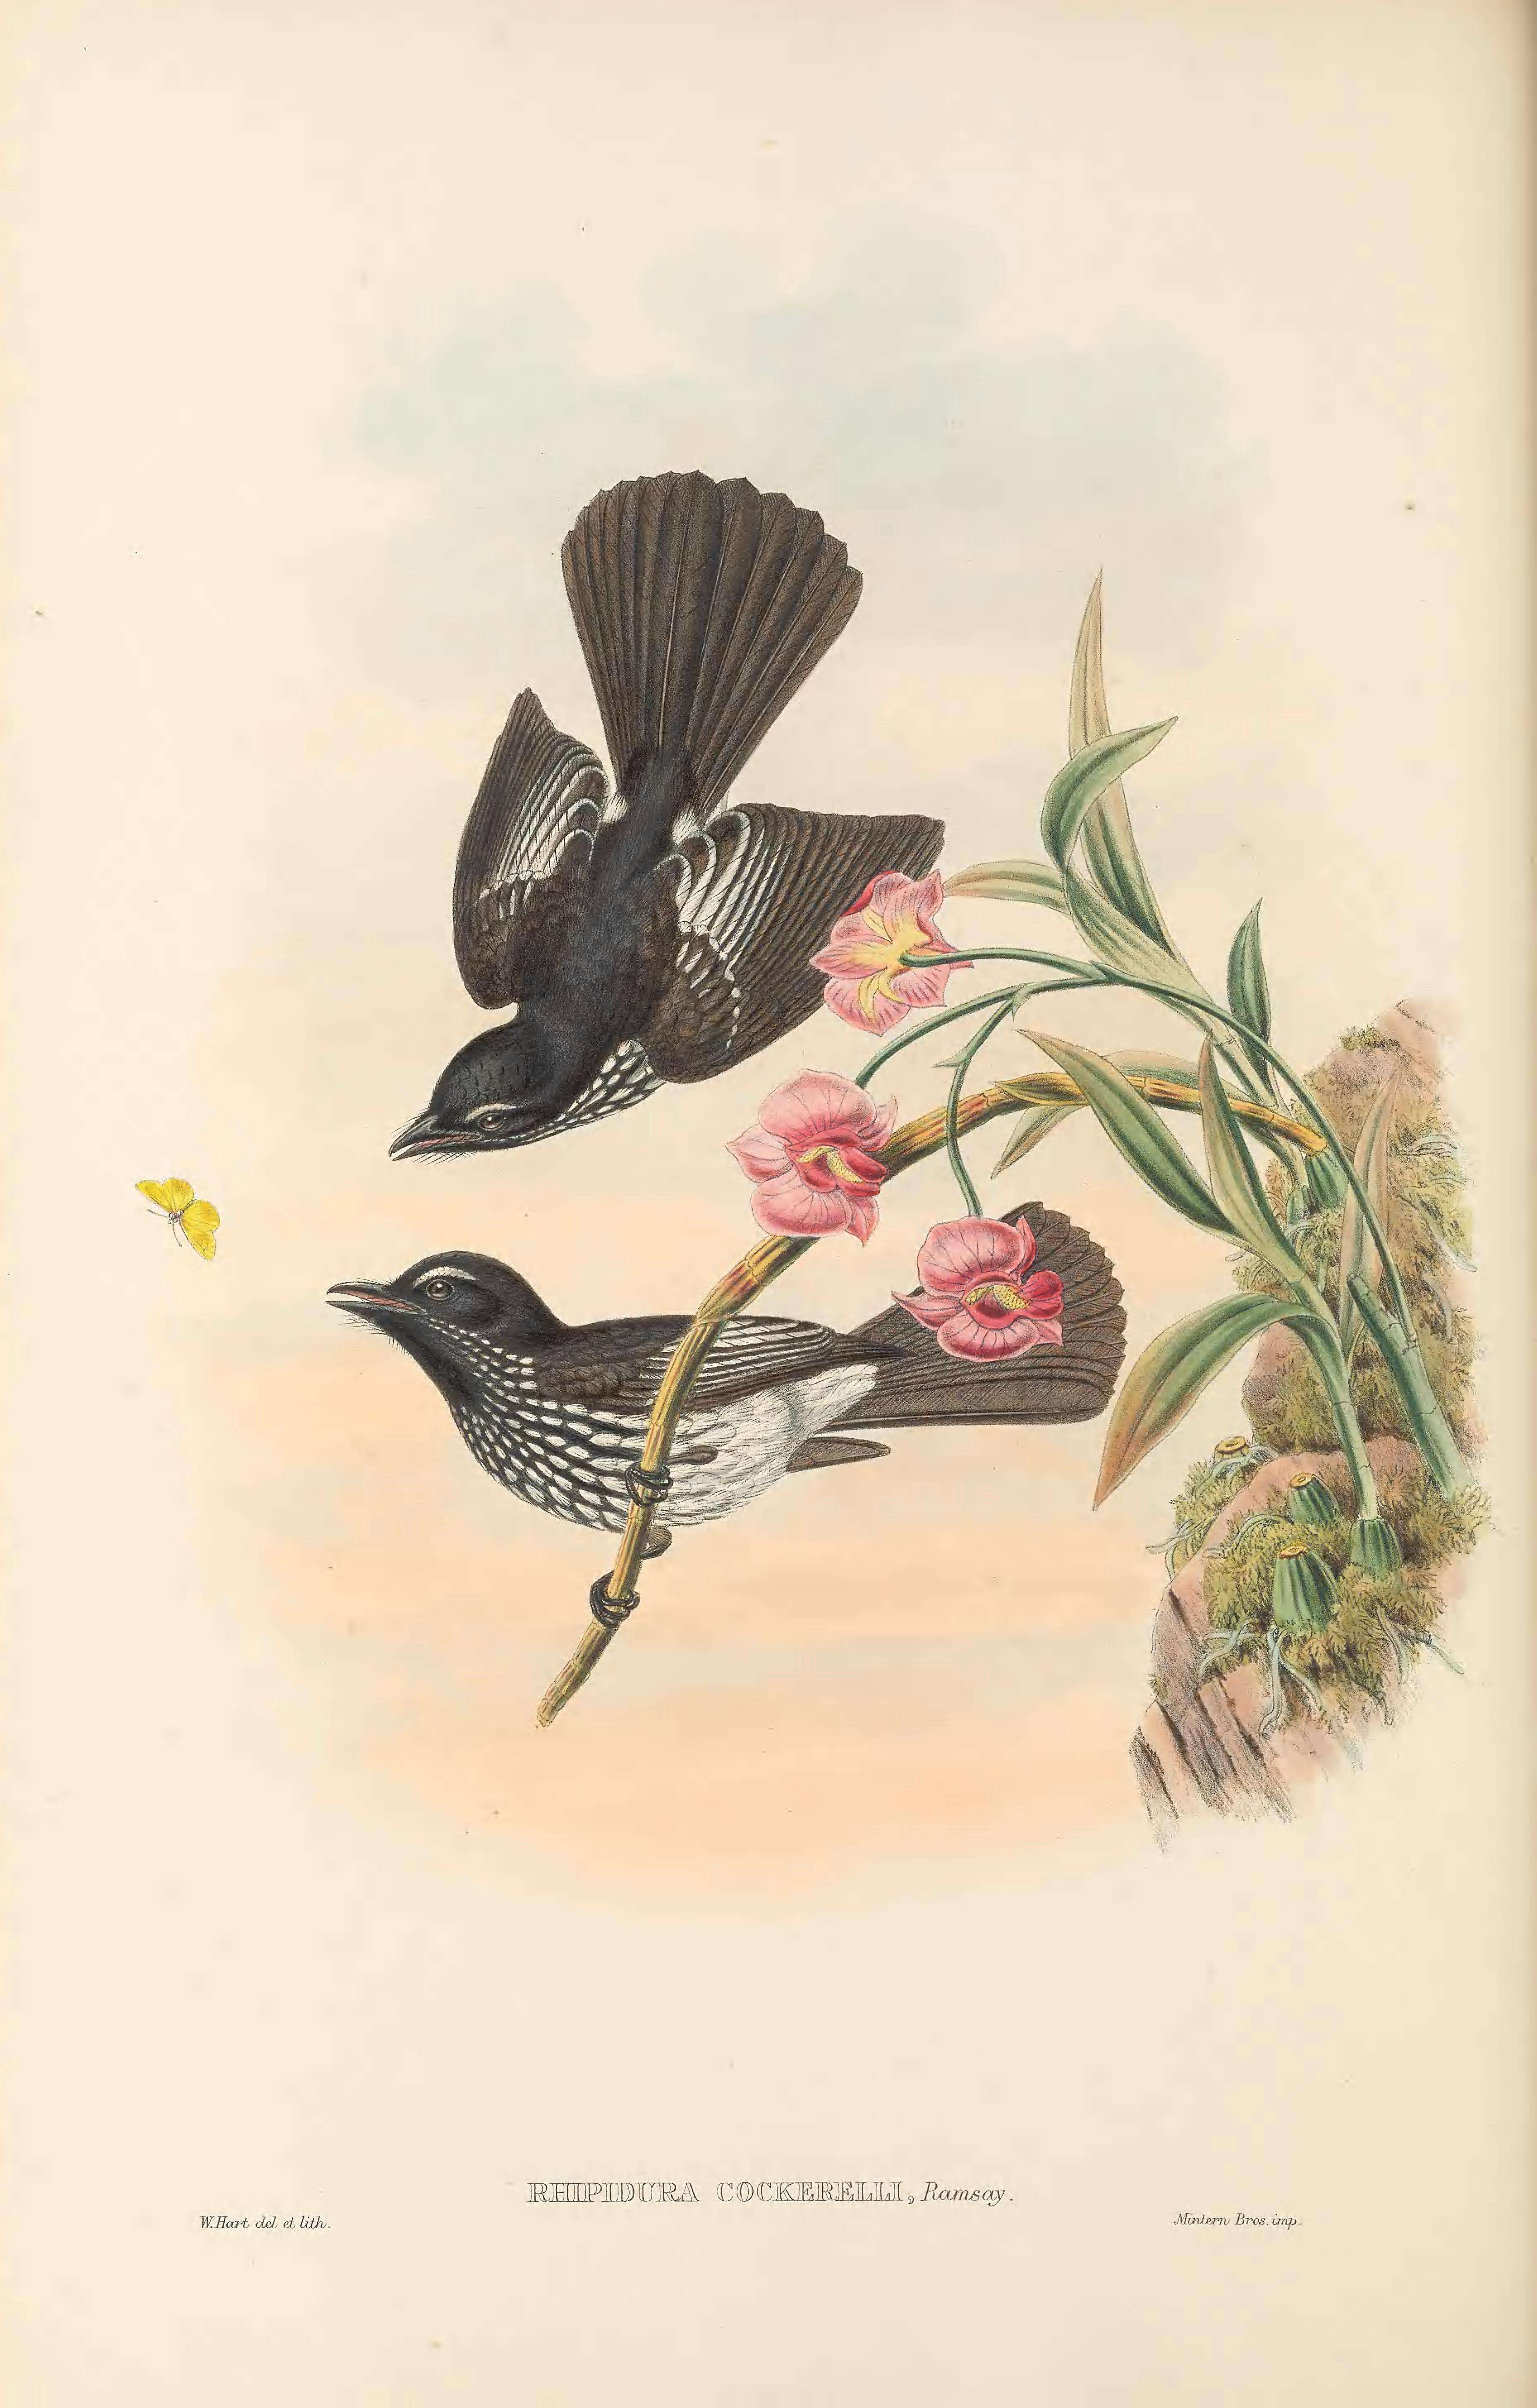 Image of Cockerell's Fantail